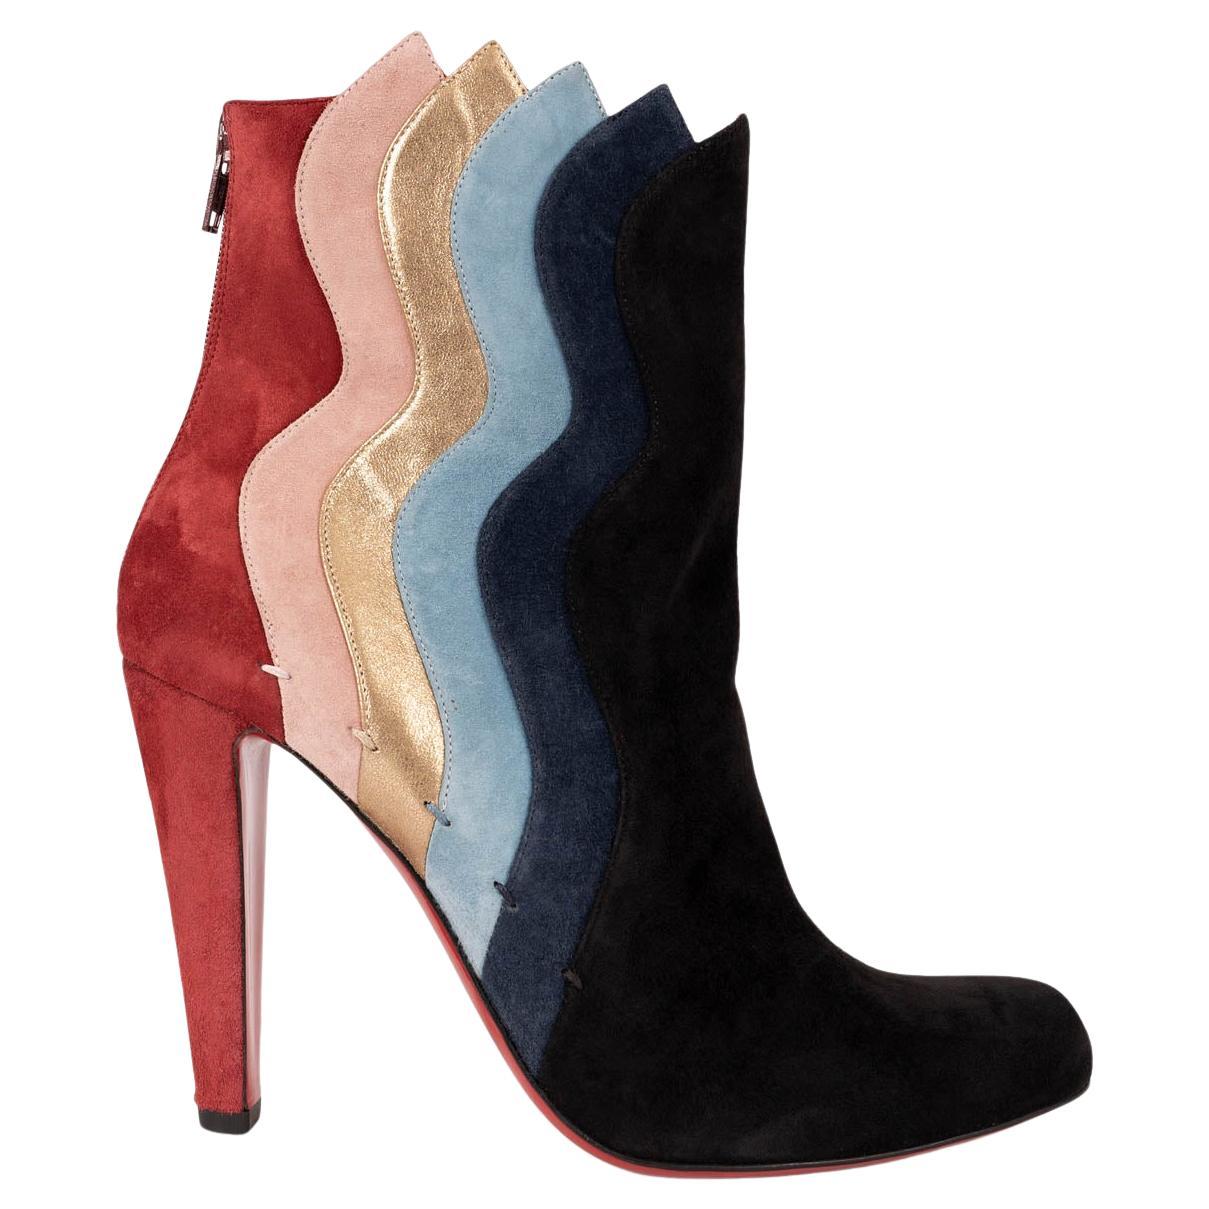 CHRISTIAN LOUBOUTIN multi suede 2016 WAVY 85 Ankle Boots Shoes 38.5 For Sale